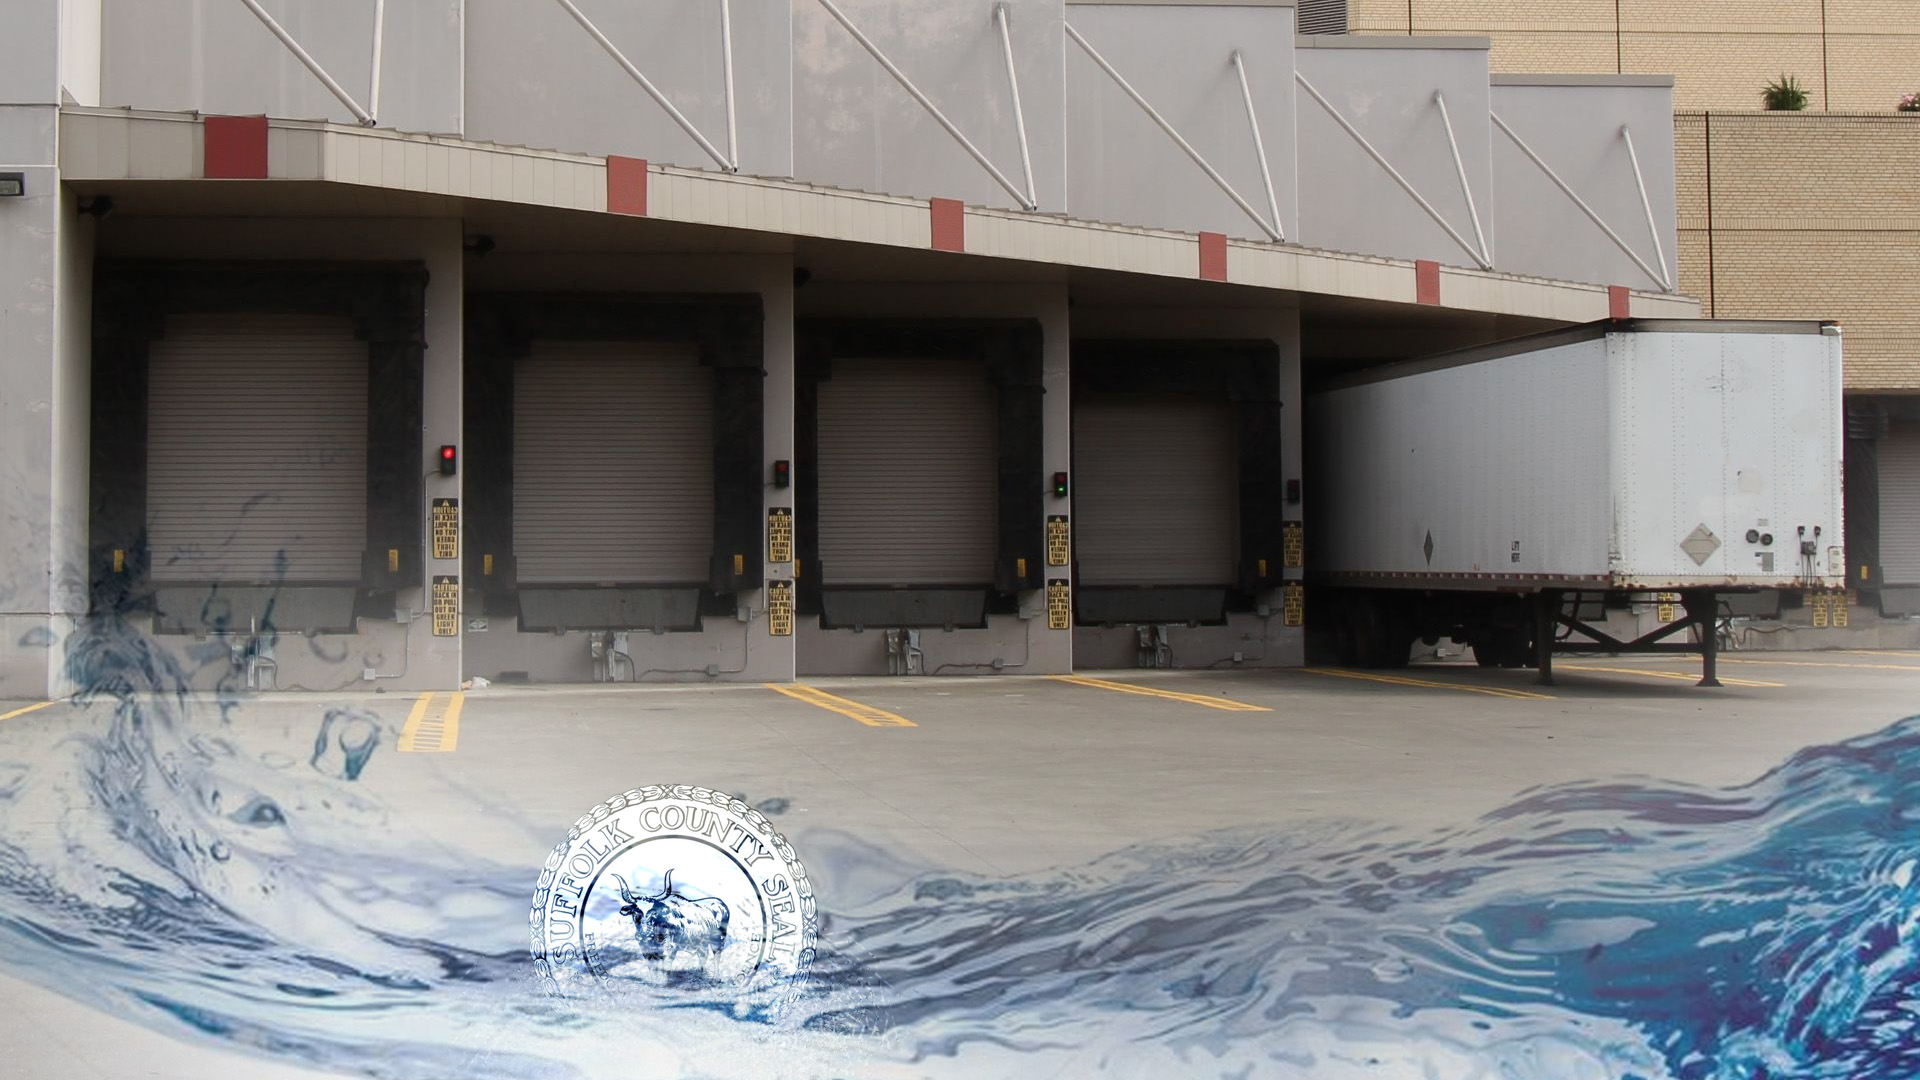 All Storm Drains Inc. | Loading Dock Drainage Service | Suffolk County, Long Island, NY | Phone: 516.825.1010 Fax: 631.475.2898 | George@AllStormDrains.com